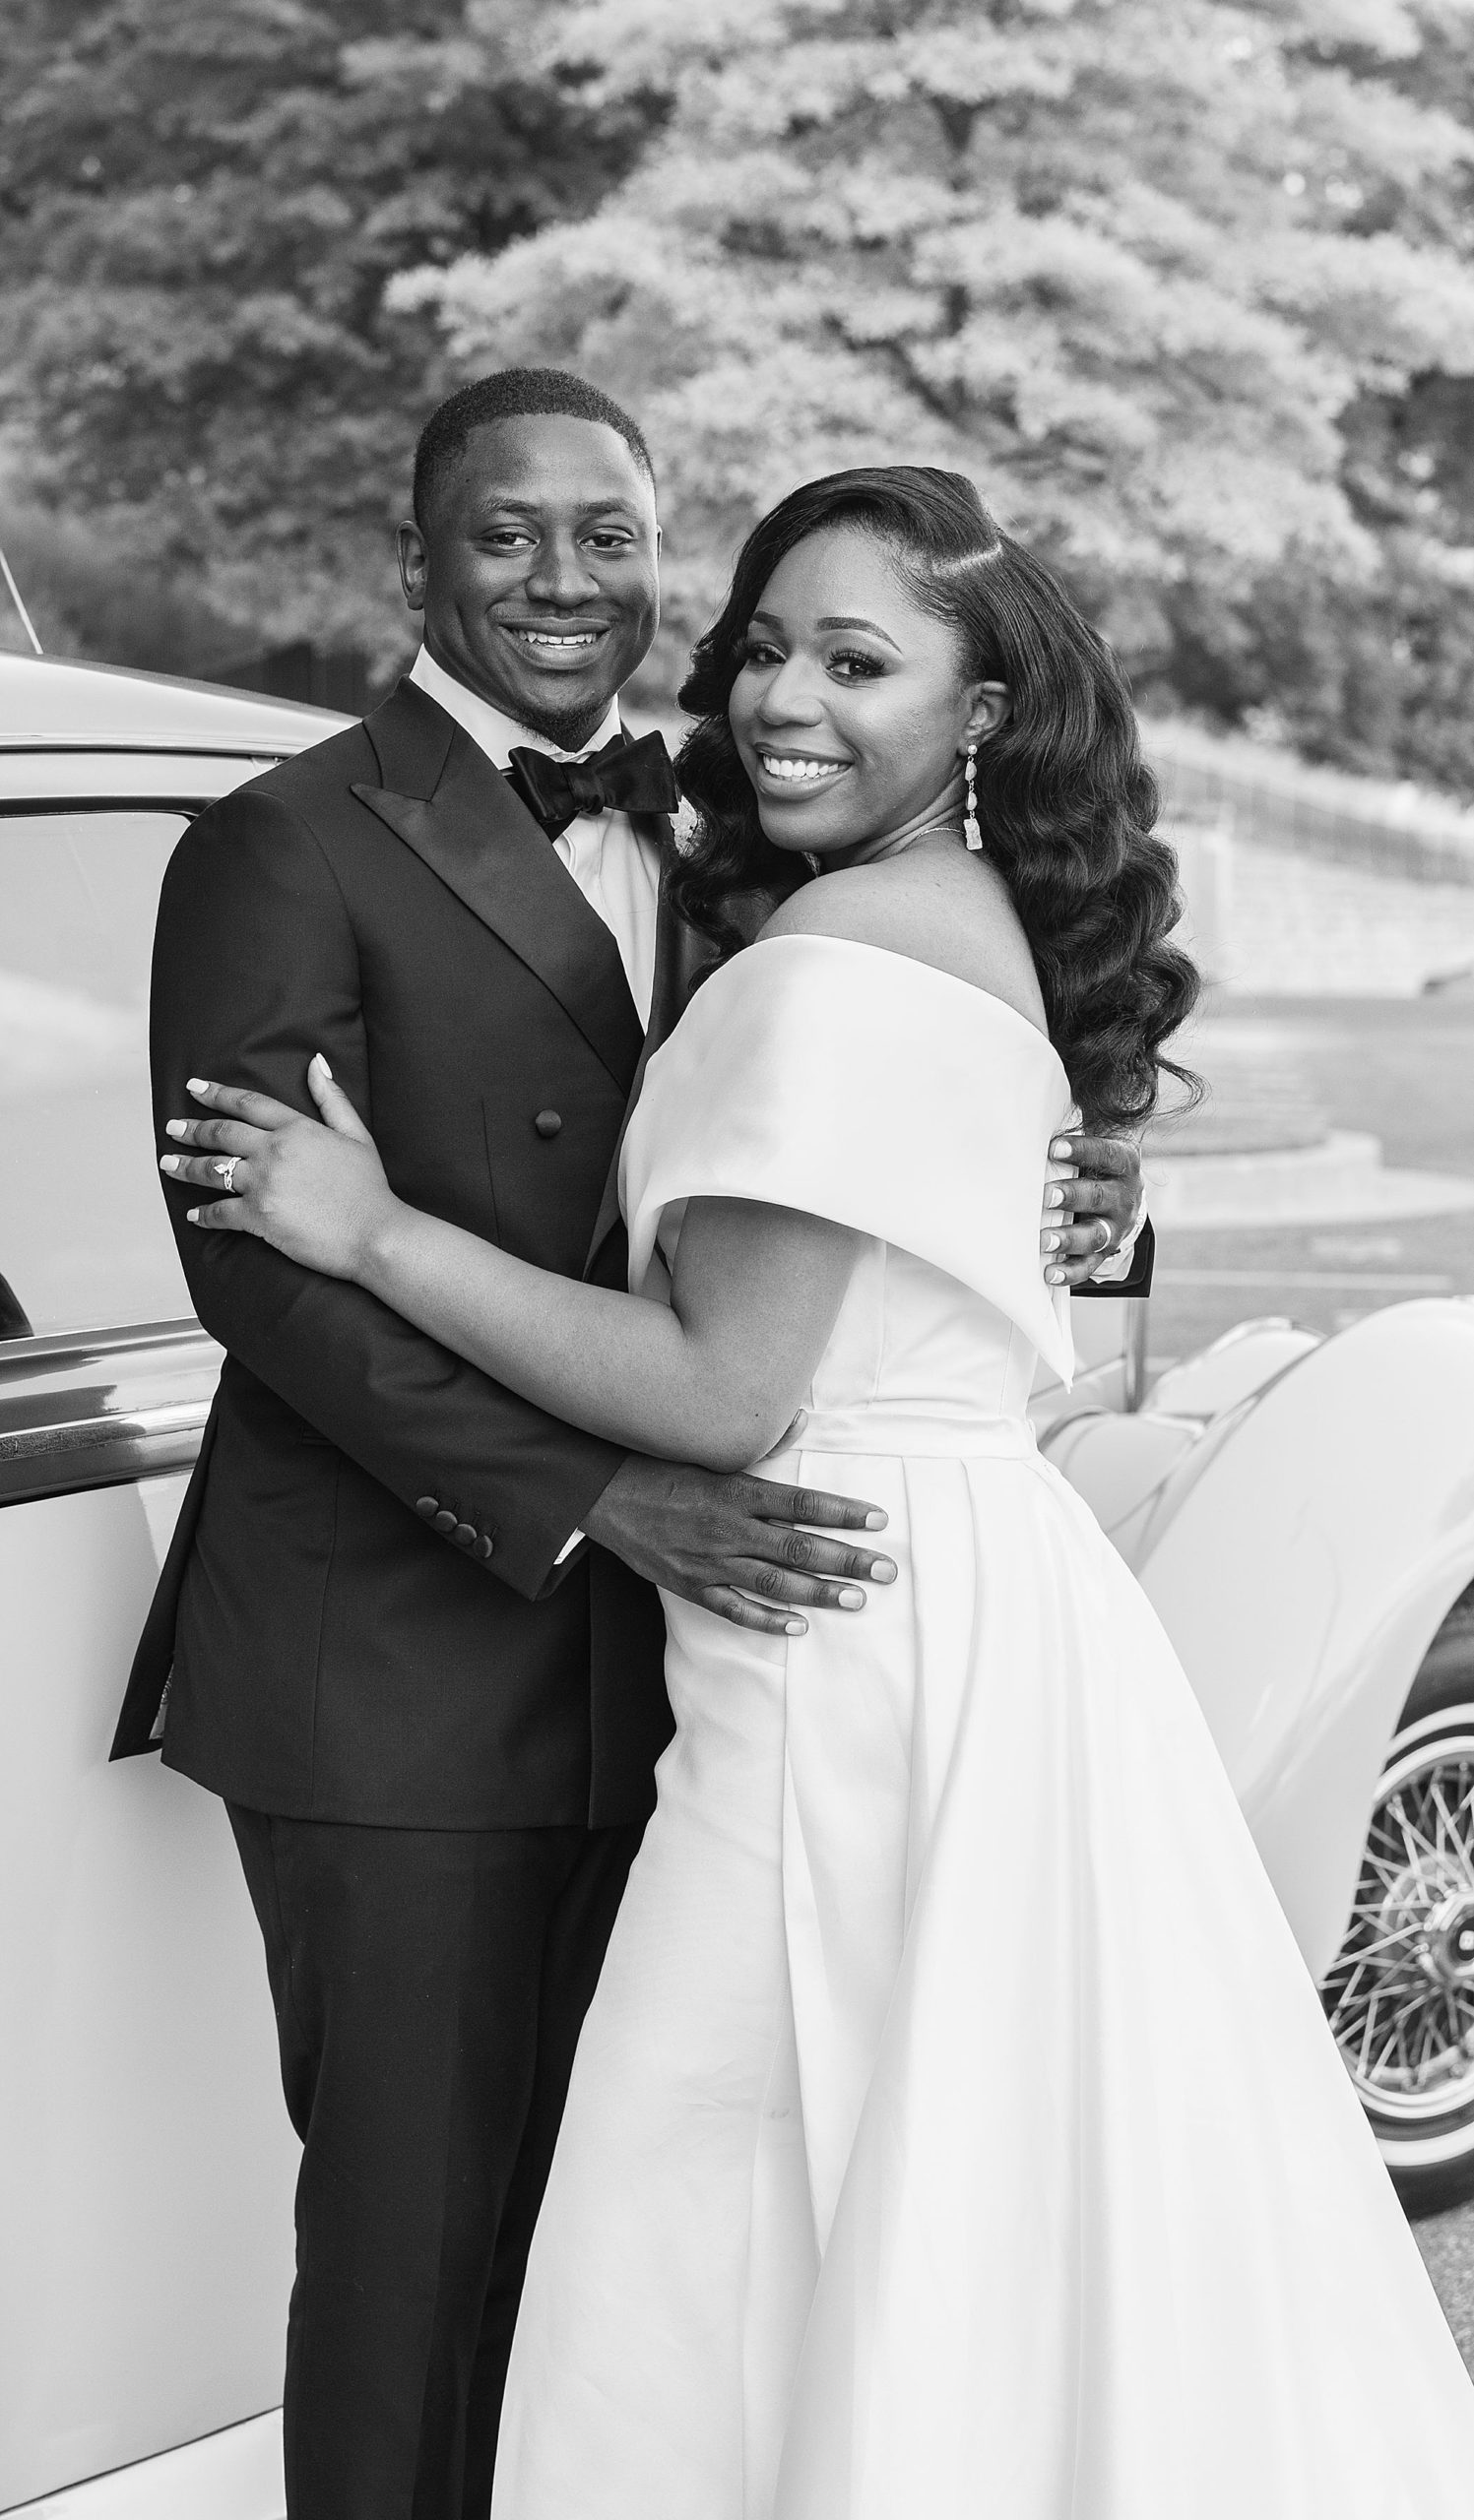 bride and groom pose by classic car